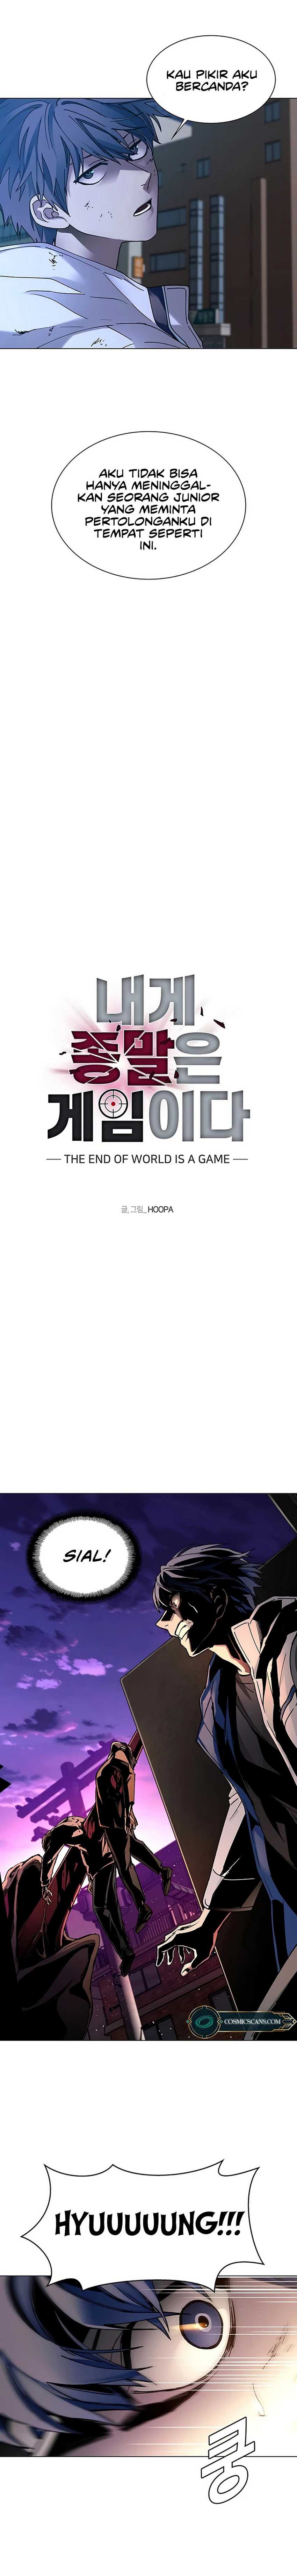 The End of the World is Just a Game to Me Chapter 09